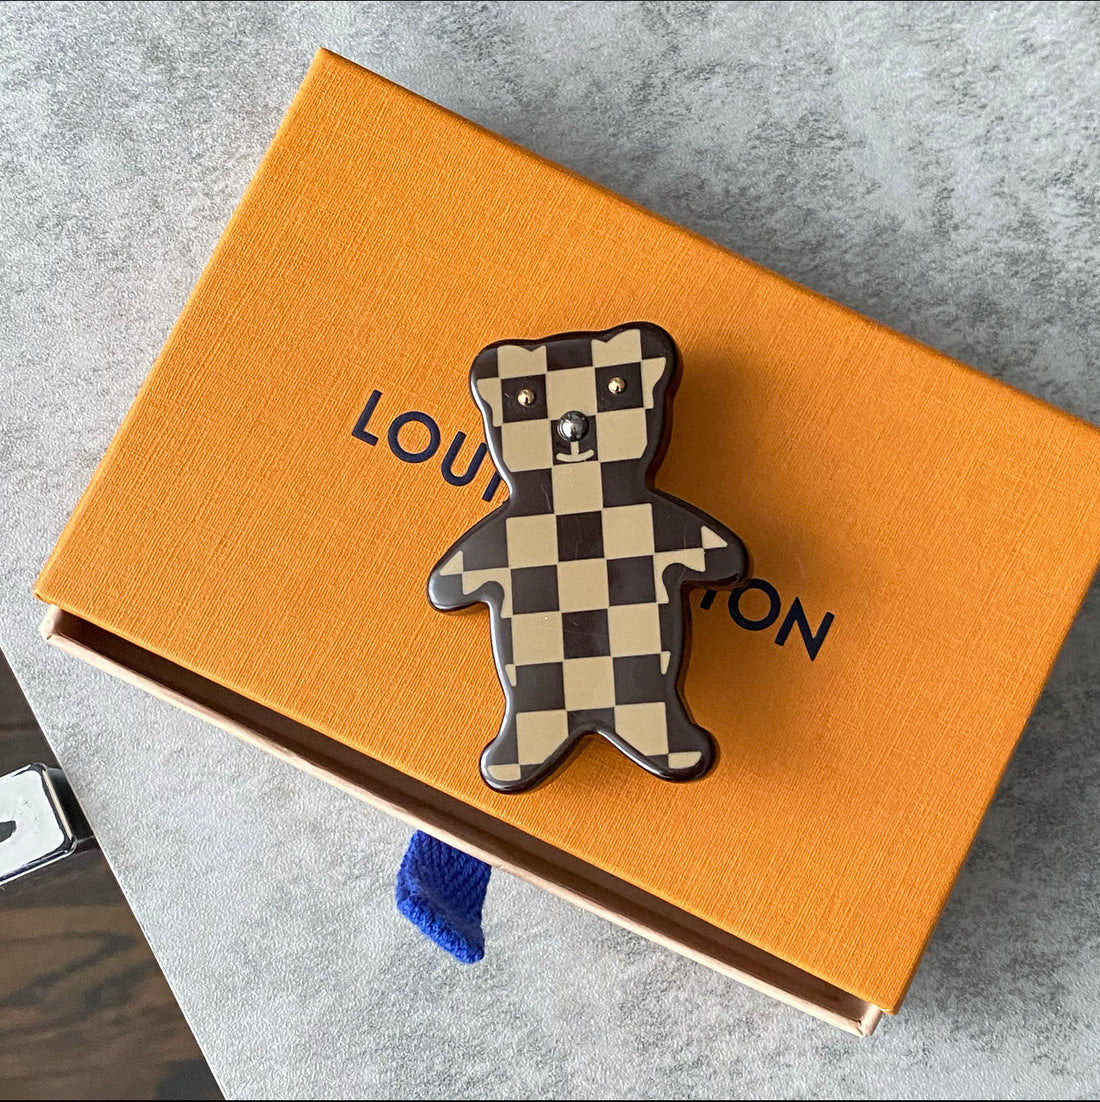 Louis Vuitton Damier Check Resin Bear Brooch Pin – I MISS YOU VINTAGE